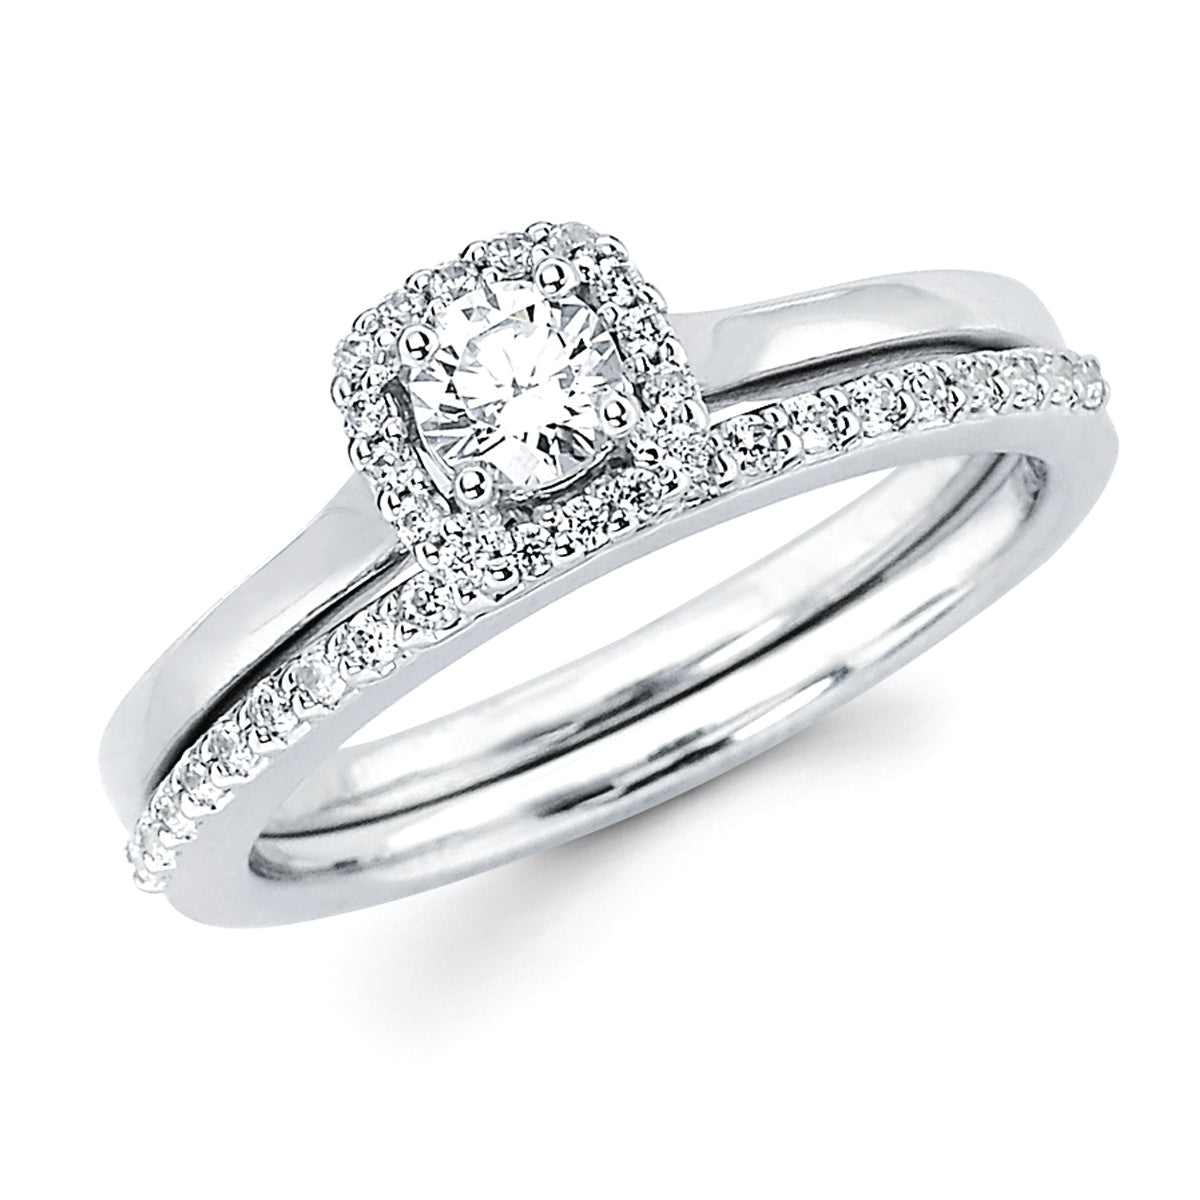 Halo Bridal: .08 Ctw. Diamond Halo Semi Mount available for 1/4 Ct. Round Center Diamond in 14K Gold